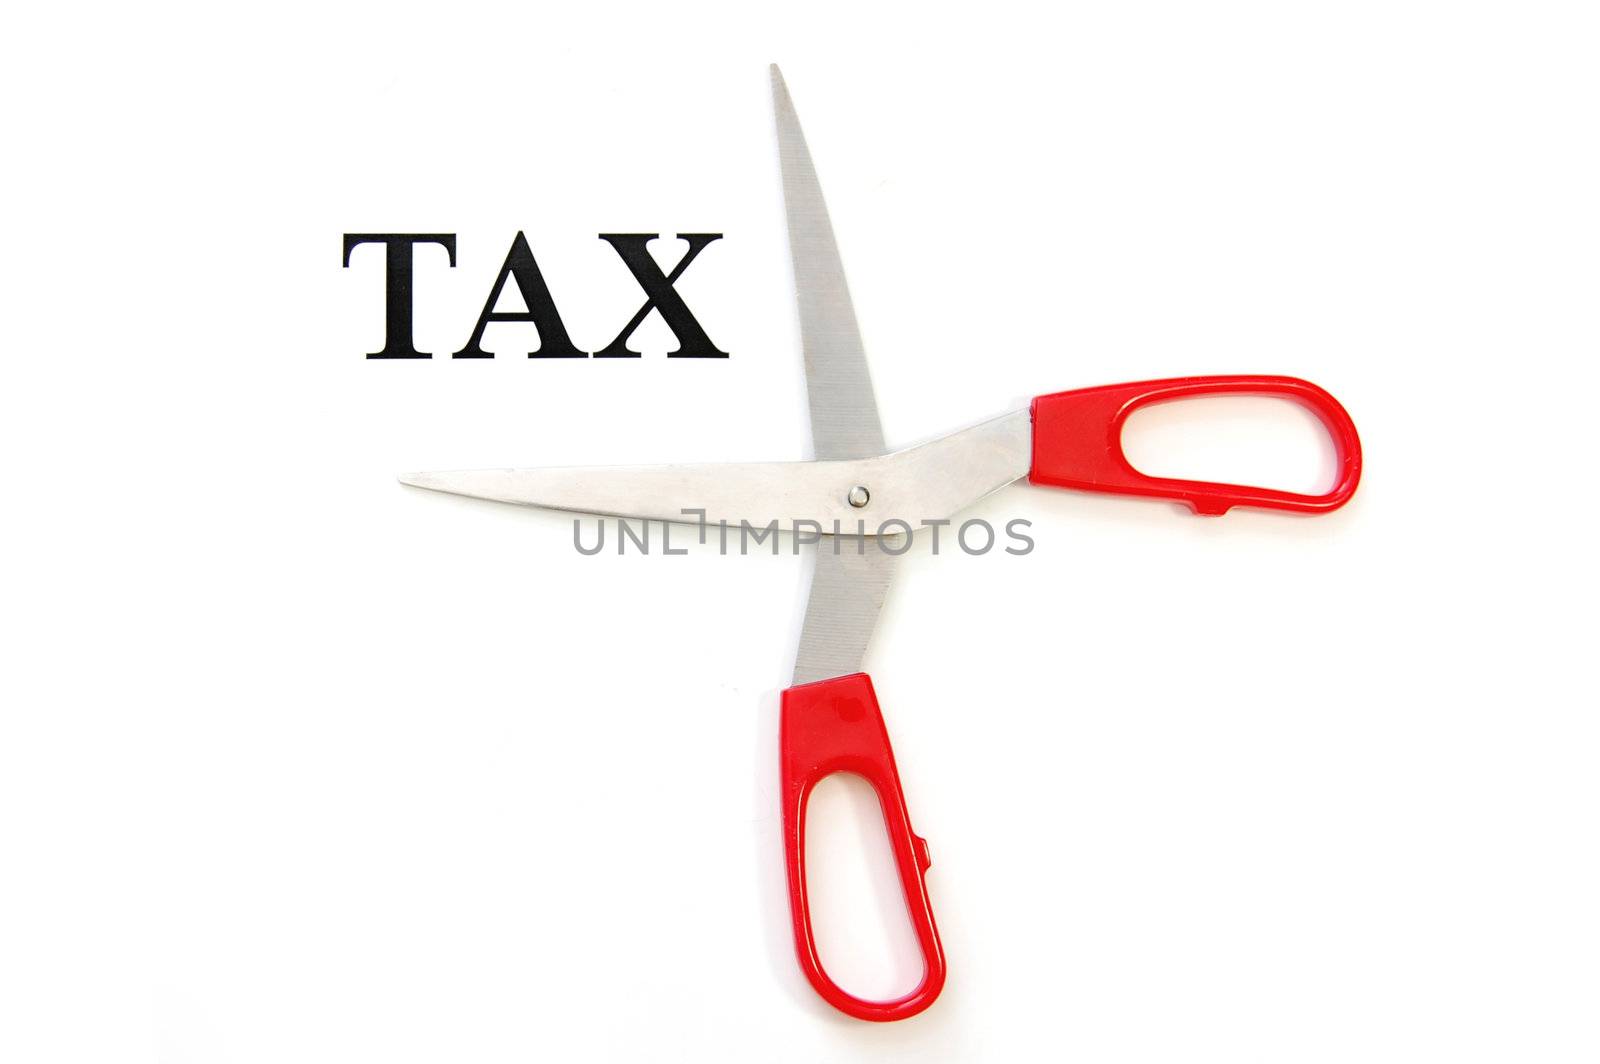 Getting ready to cut 'tax' with a pair of scissors